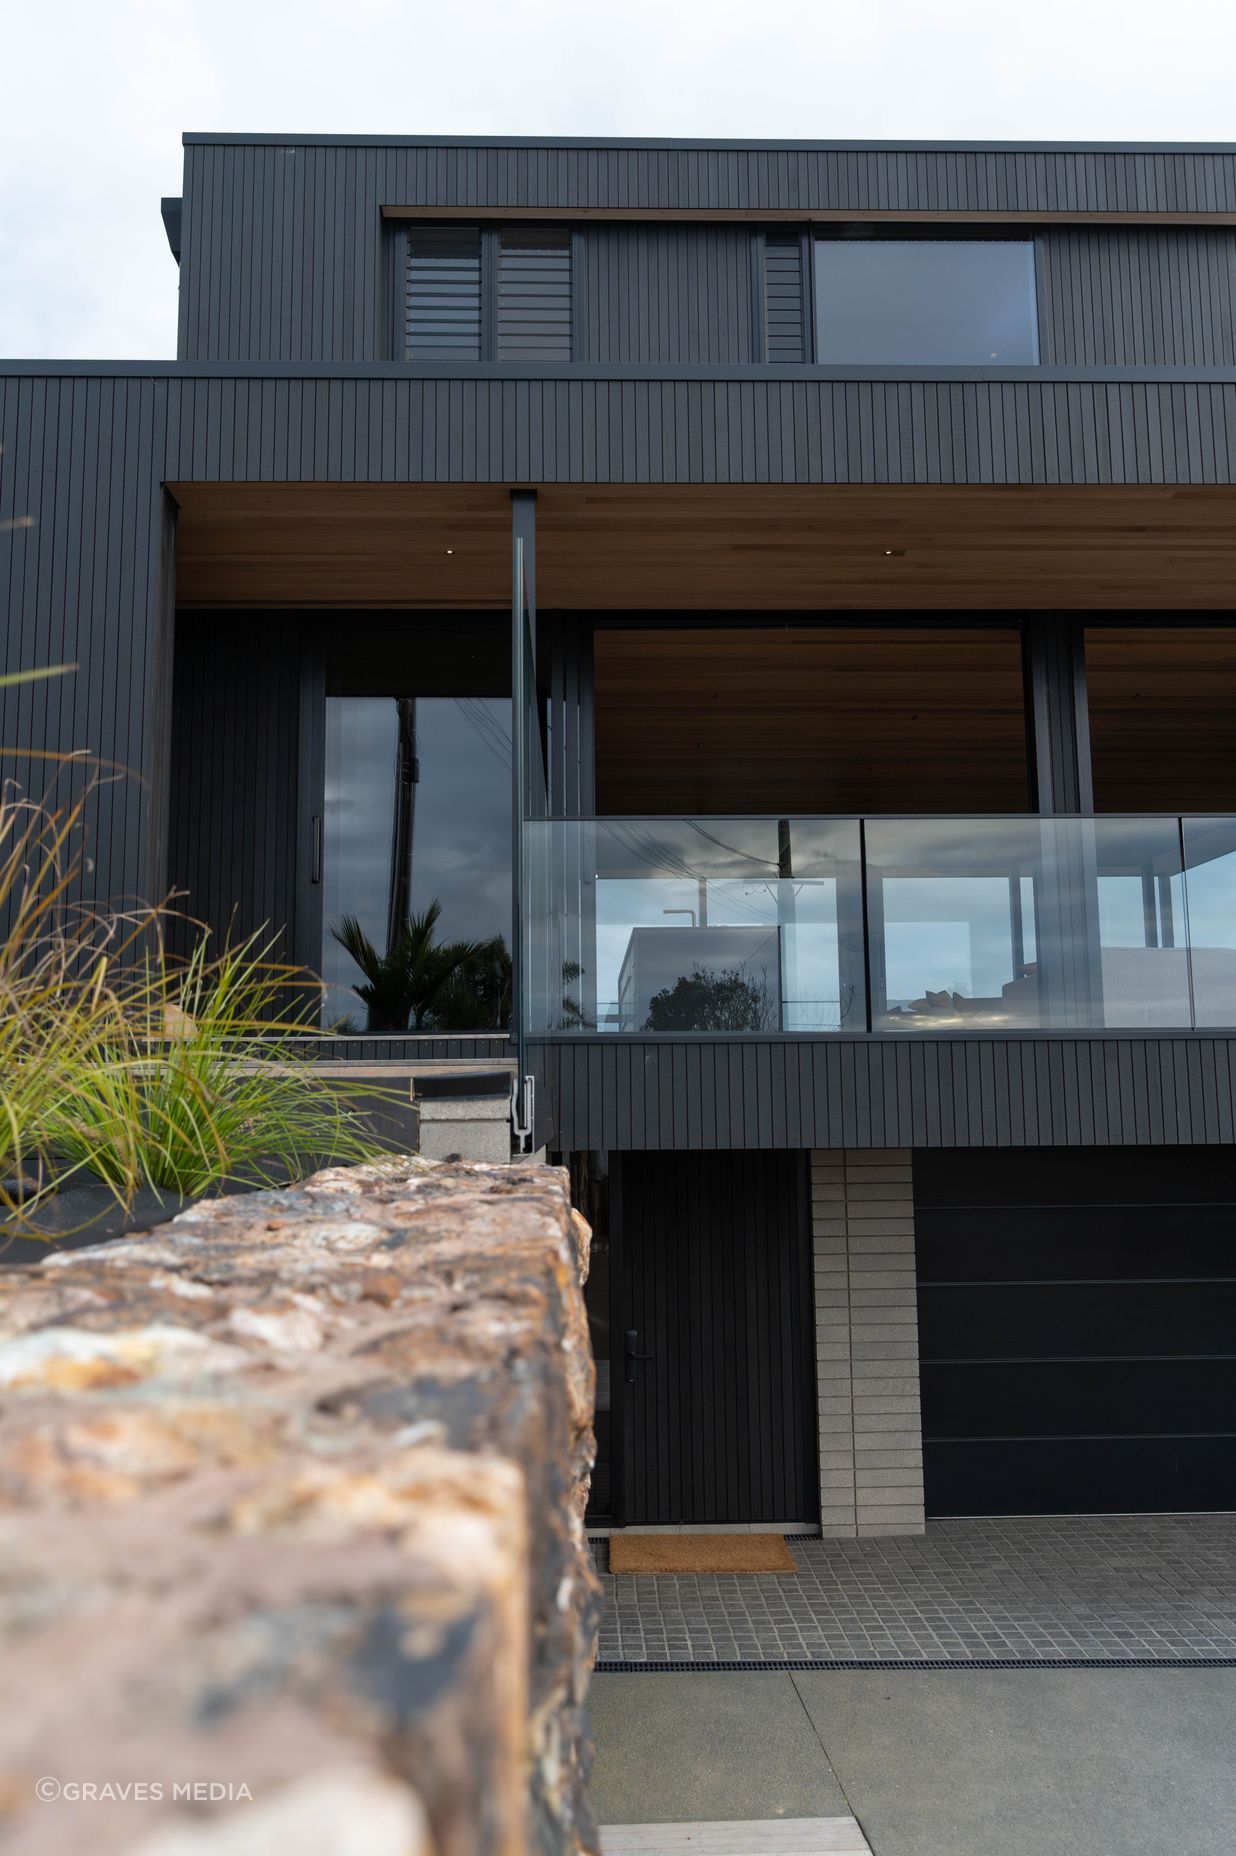 The exterior materiality complements the natural surrounds.